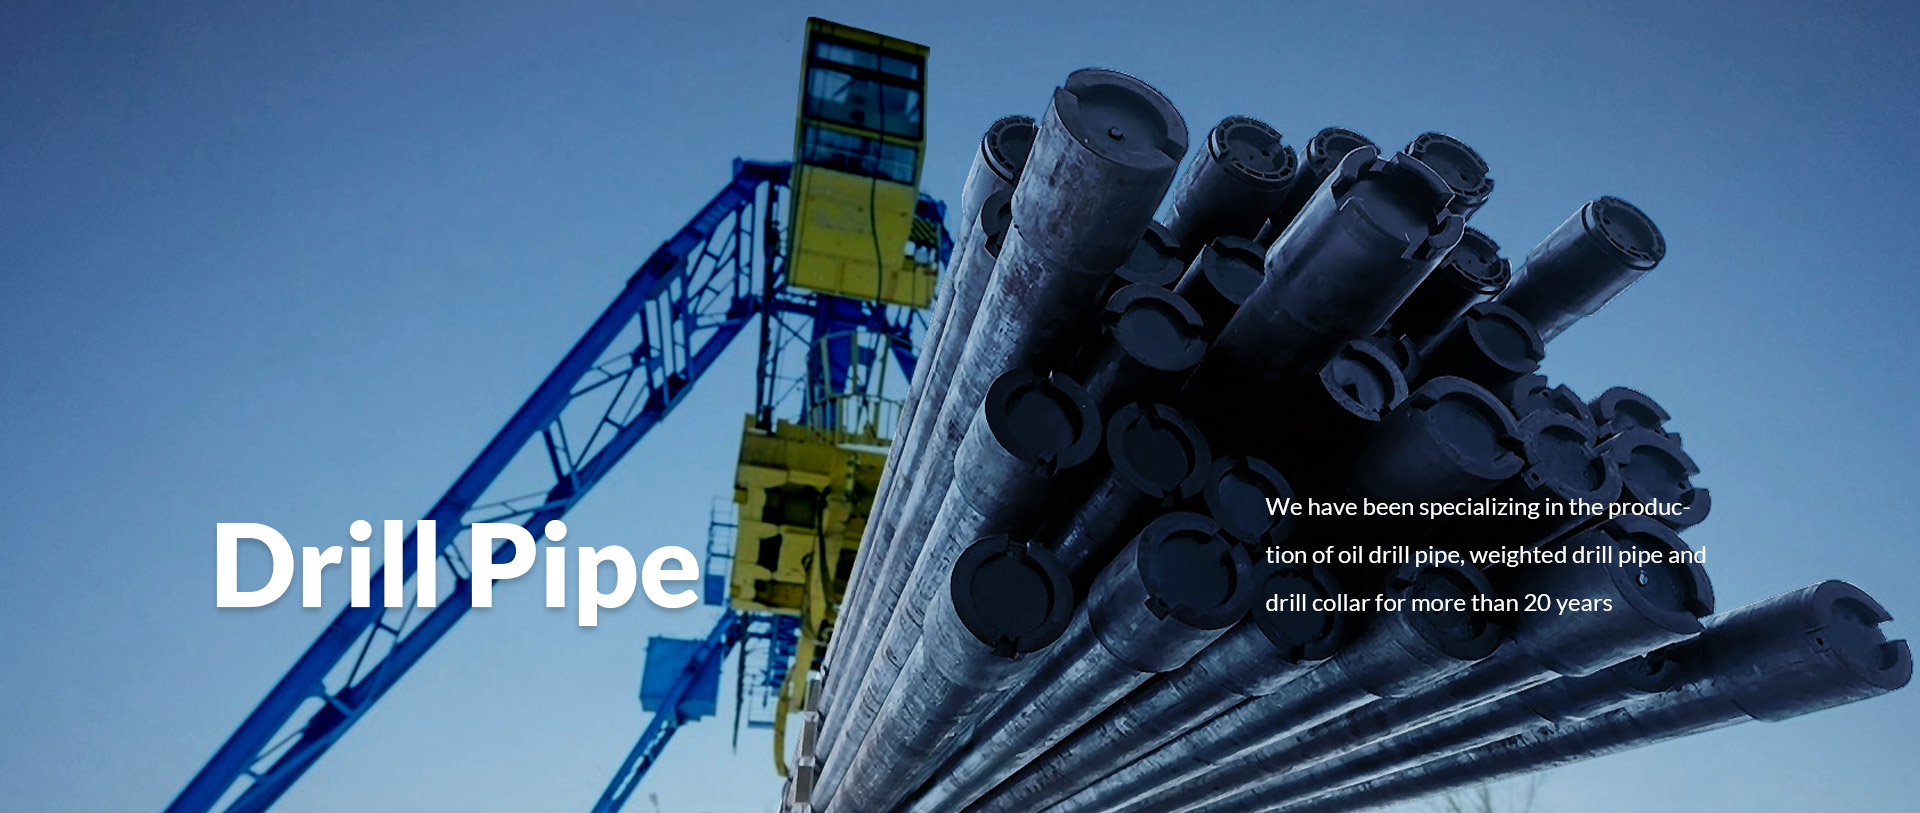 Where is drill pipe manufactured?